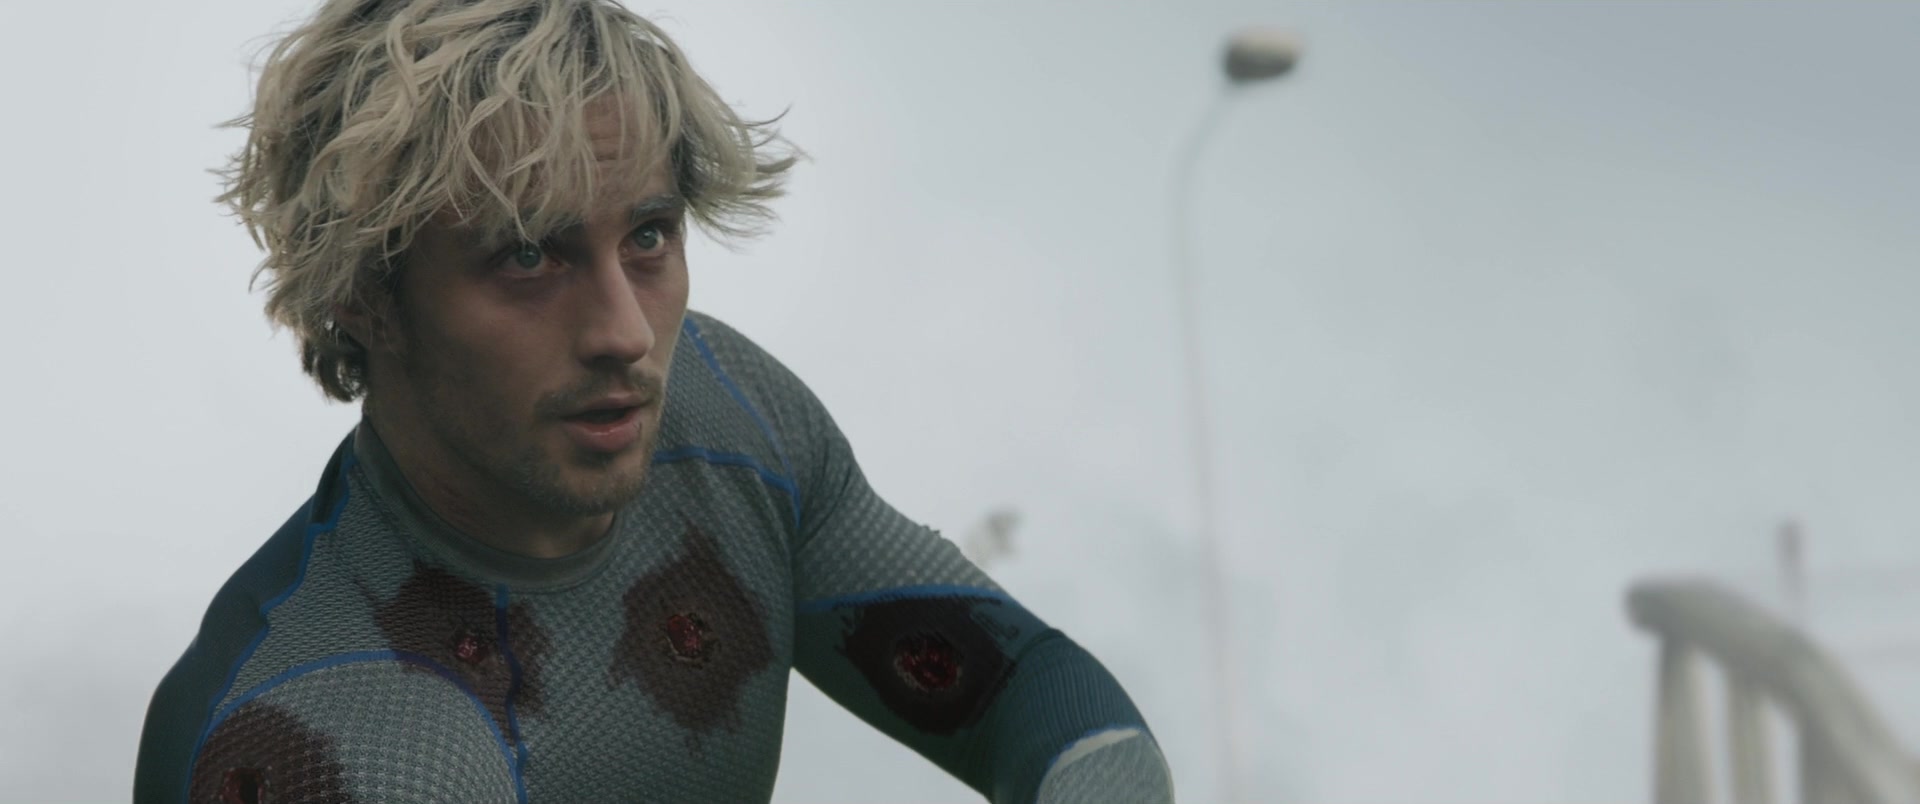 Quicksilver (Aaron-Taylor Johnson) meets his end during the Battle of Sokovia in Avengers: Age of Ultron (2015), Marvel Entertainment